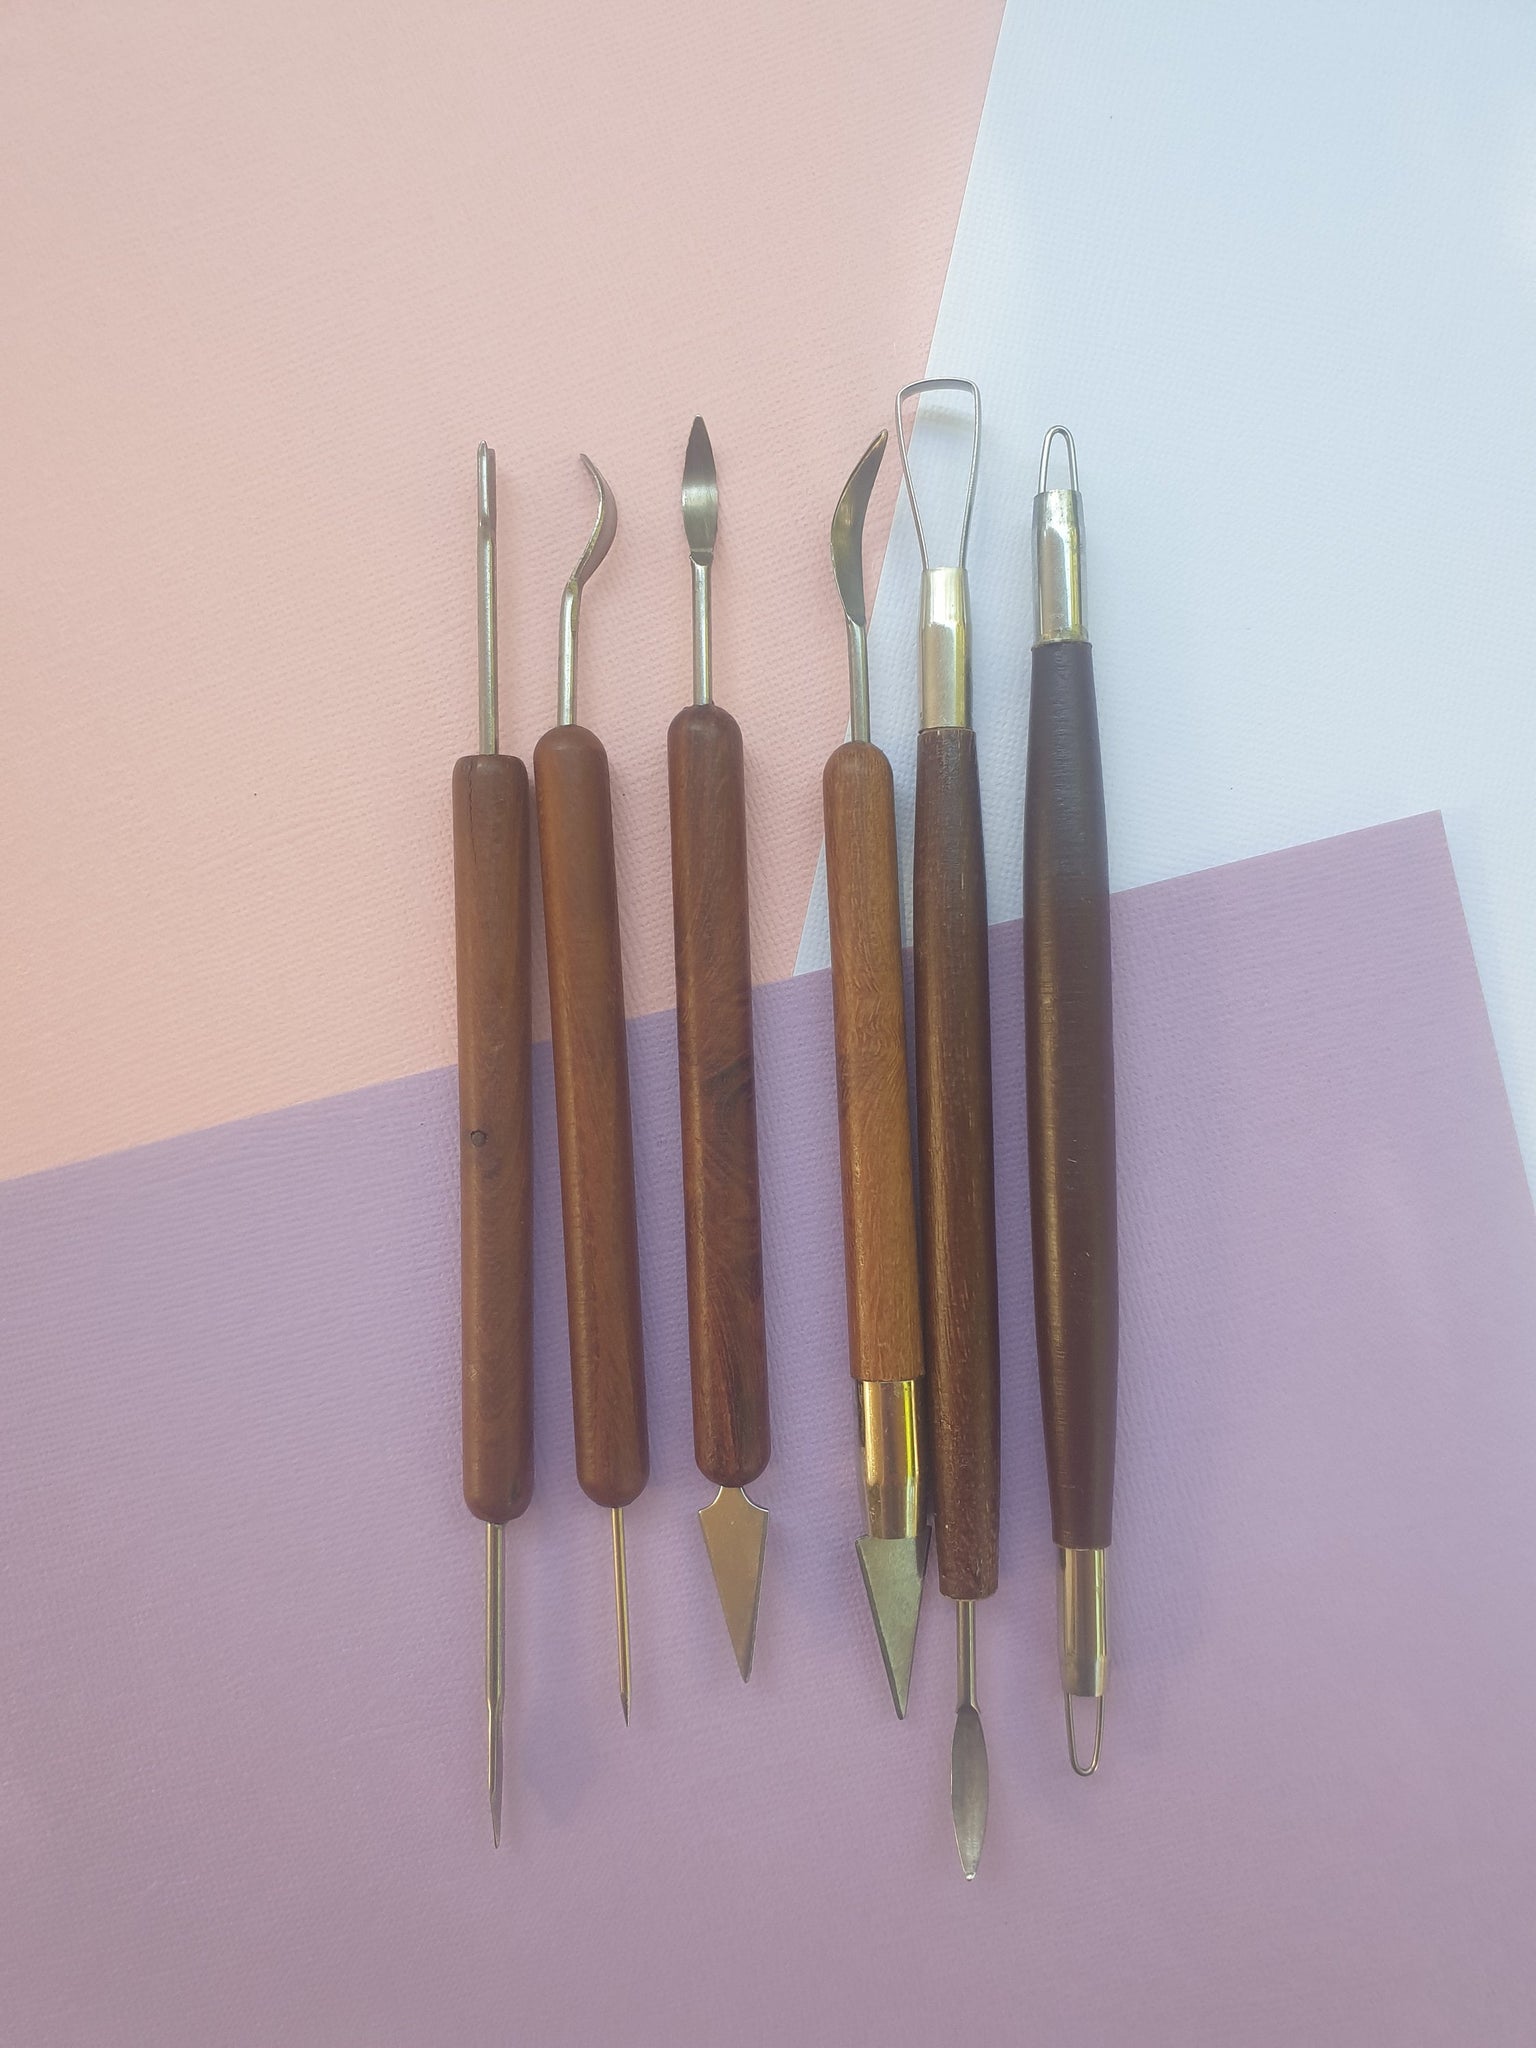 6pcs/set Sharp Clay Sculpting, Wax Carving, jewellery supplies, Clay Shapers, Wooden Ceramic tools, Pottery tools, Polymer clay tools aus